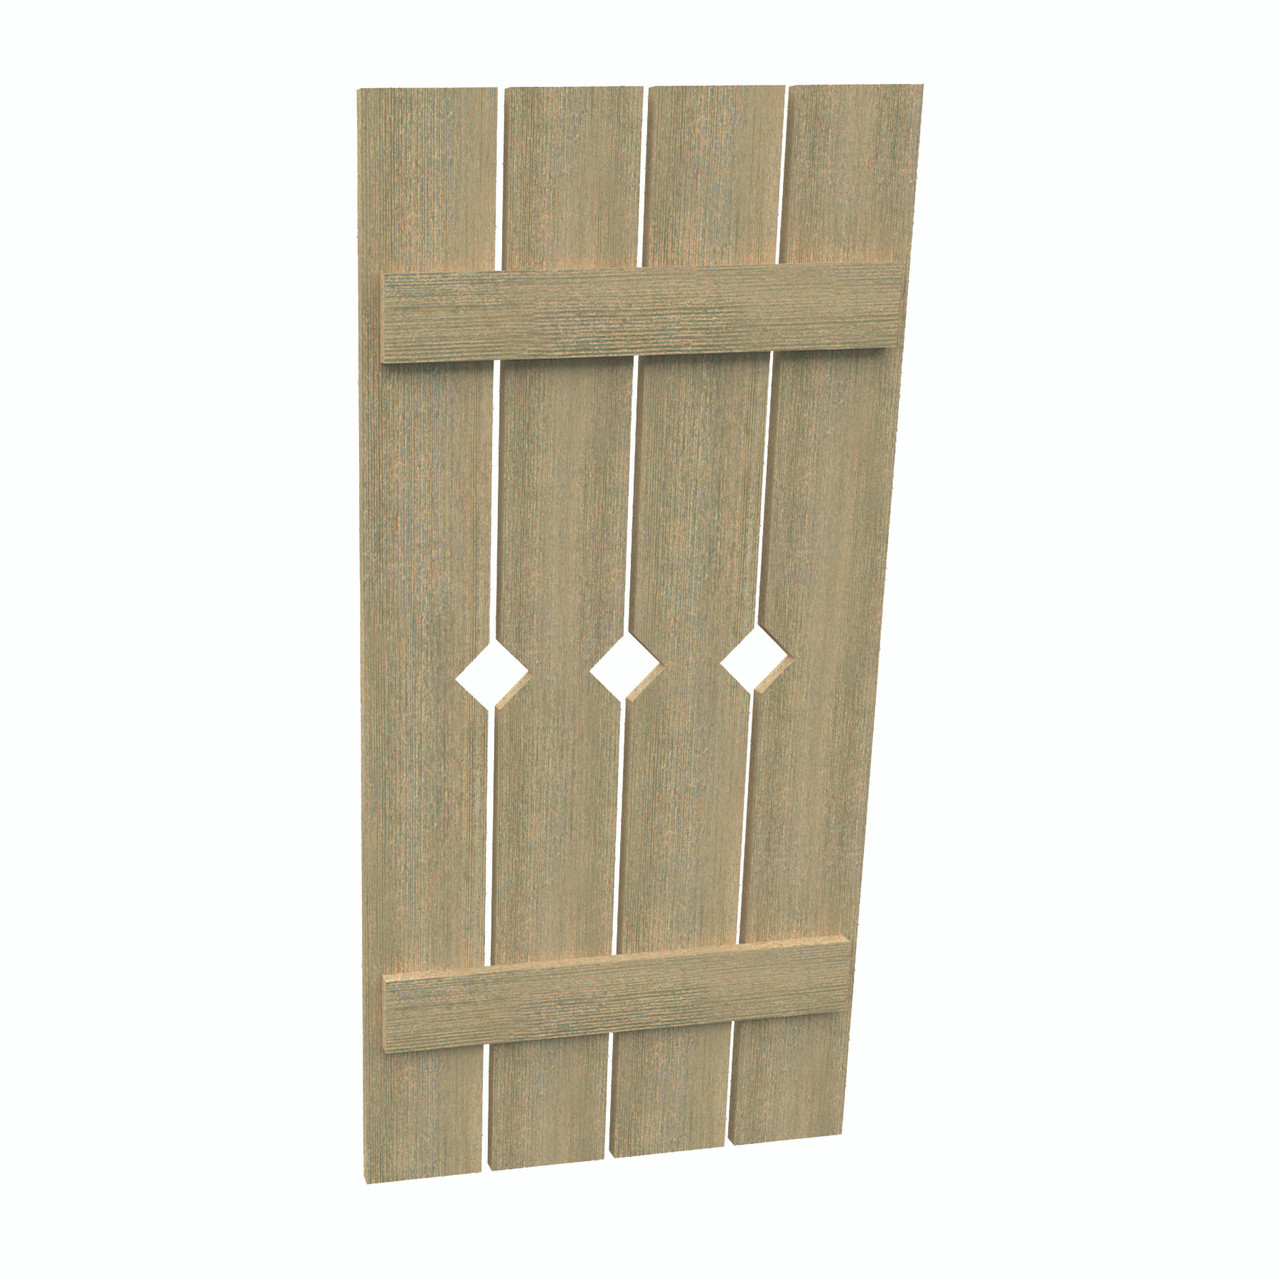 24 inch by 95 inch Plank Shutter with 4-Plank, Diamond